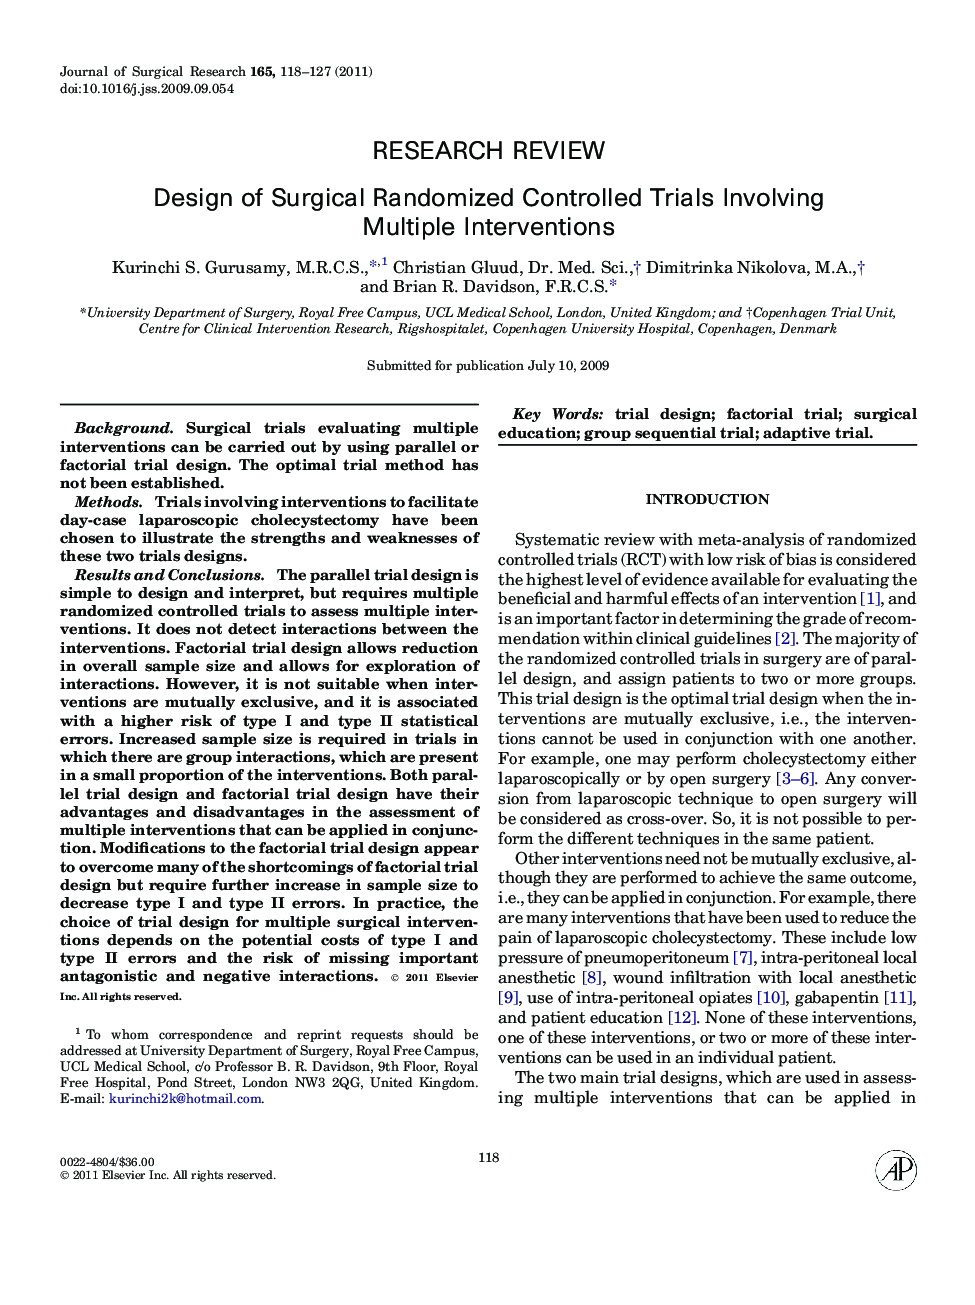 Design of Surgical Randomized Controlled Trials Involving Multiple Interventions